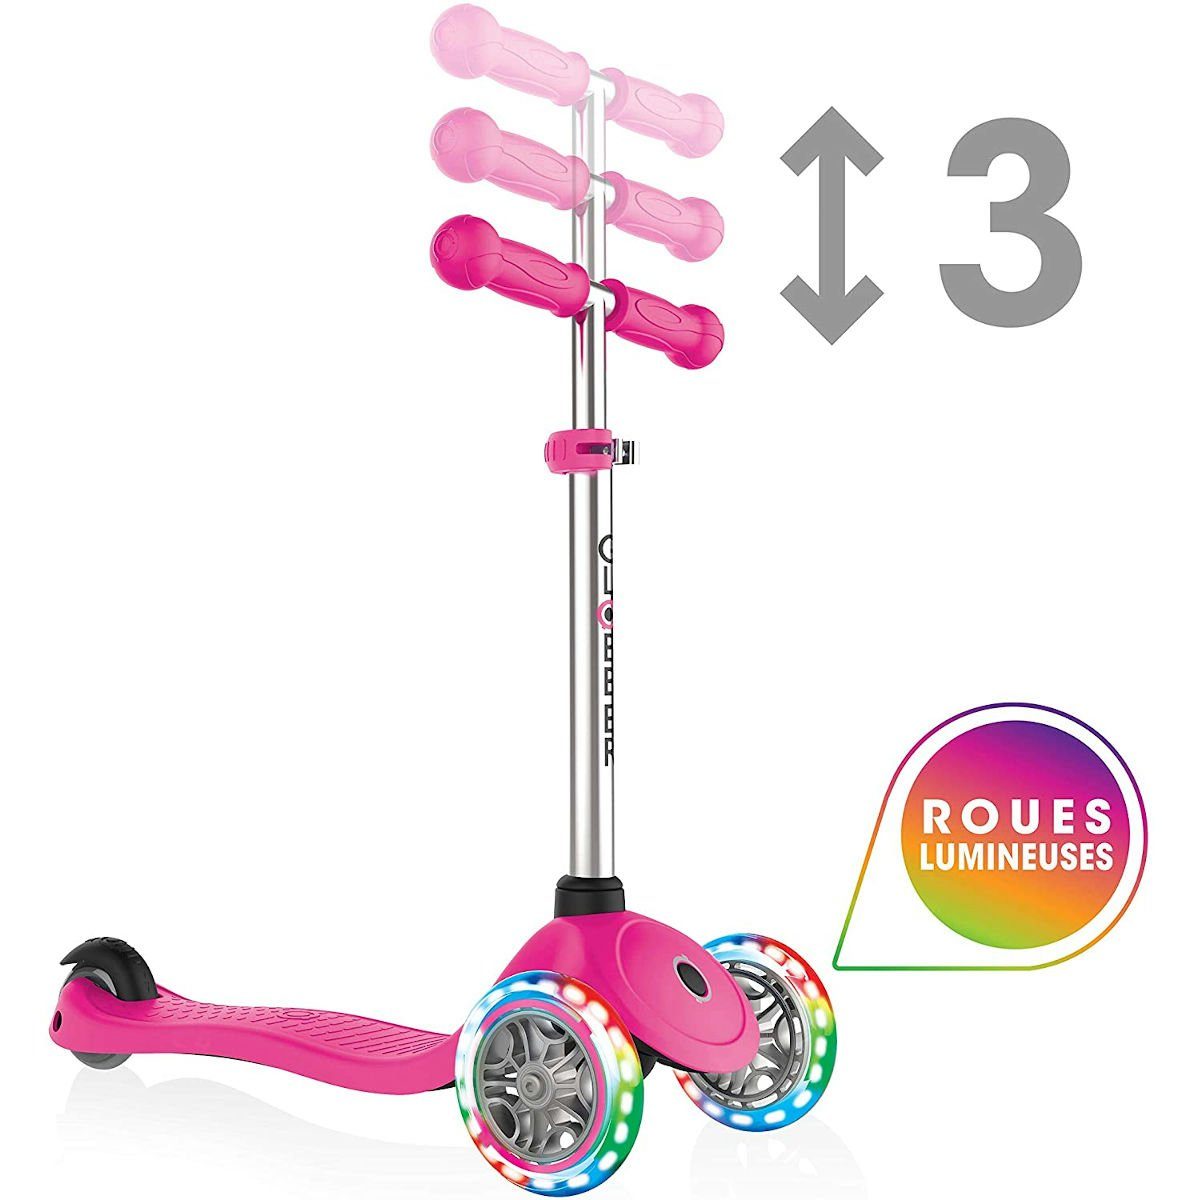 Leuchtr Neon Authentic Roller sports Primo toys Pink Kinderscooter mit & Sports authentic Lights Laufrad Globber